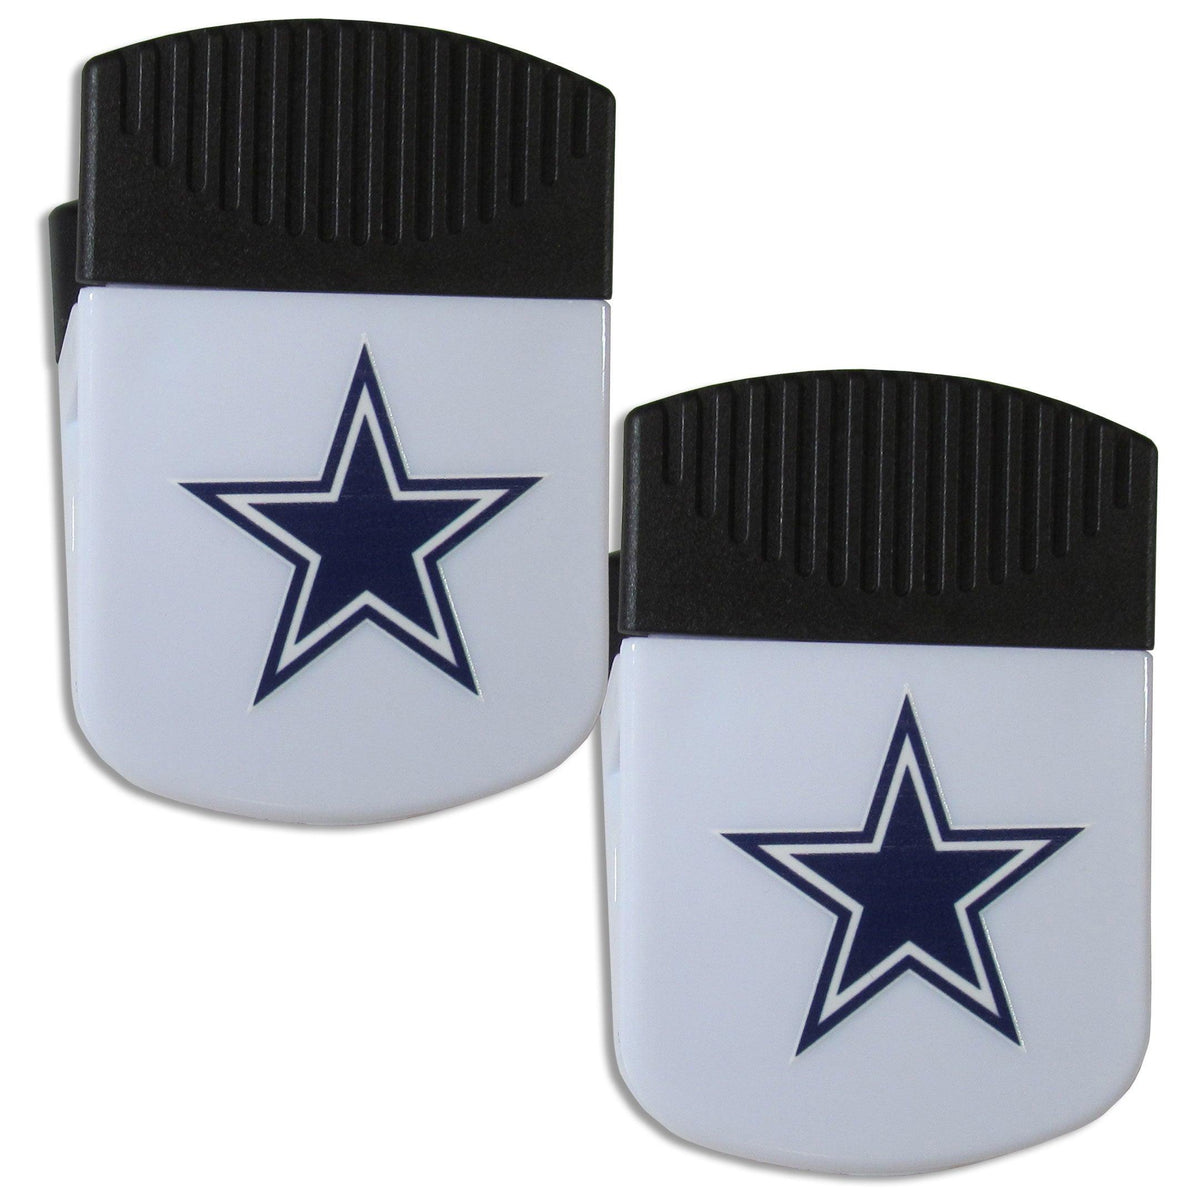 Dallas Cowboys Chip Clip Magnet with Bottle Opener, 2 pack - Flyclothing LLC